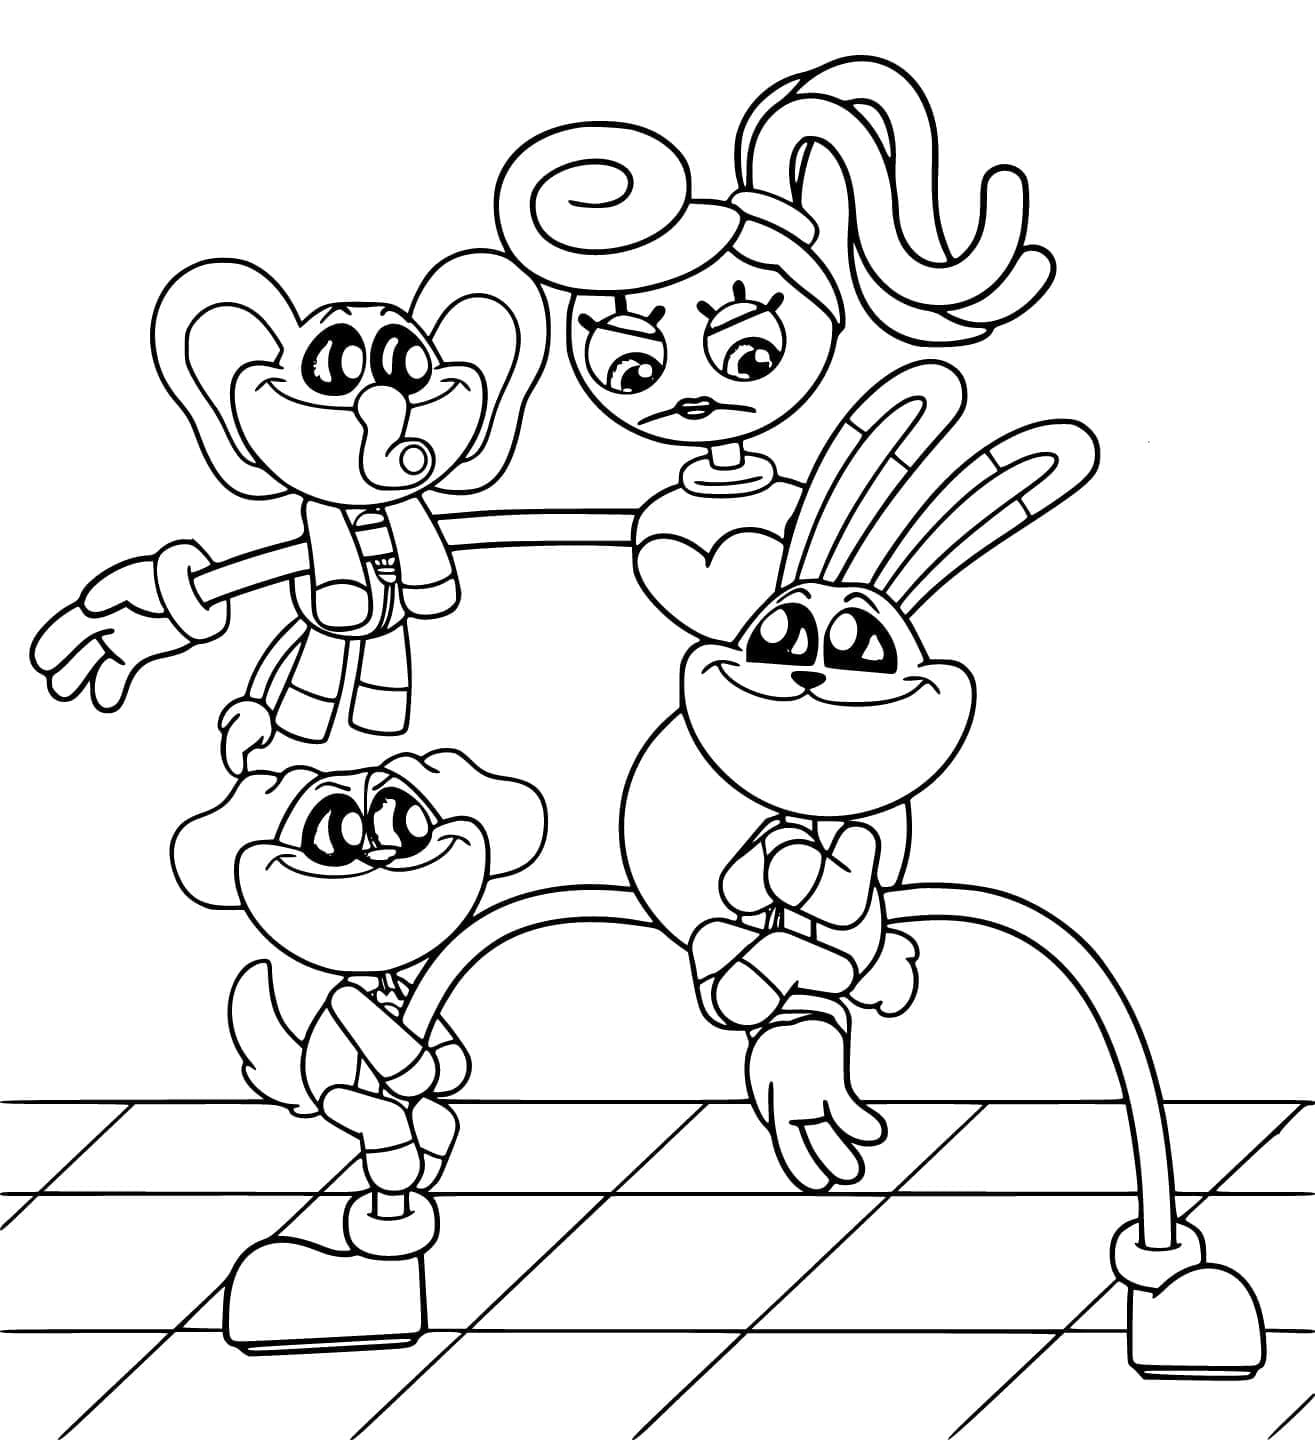 Coloriage Mommy Long Legs et Smiling Critters